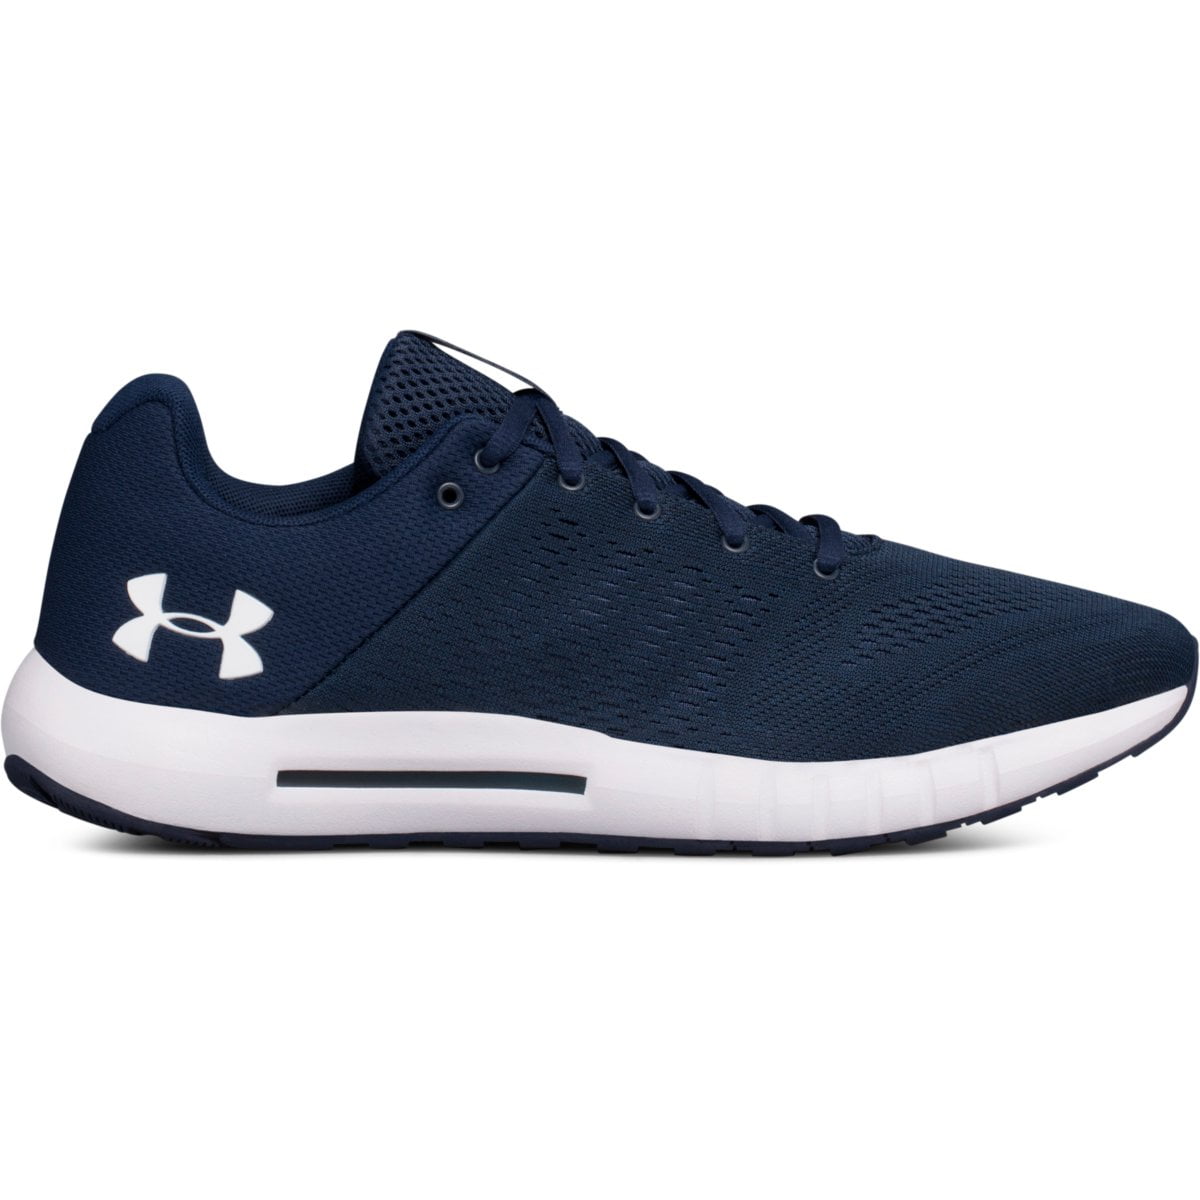 academy mens running shoes